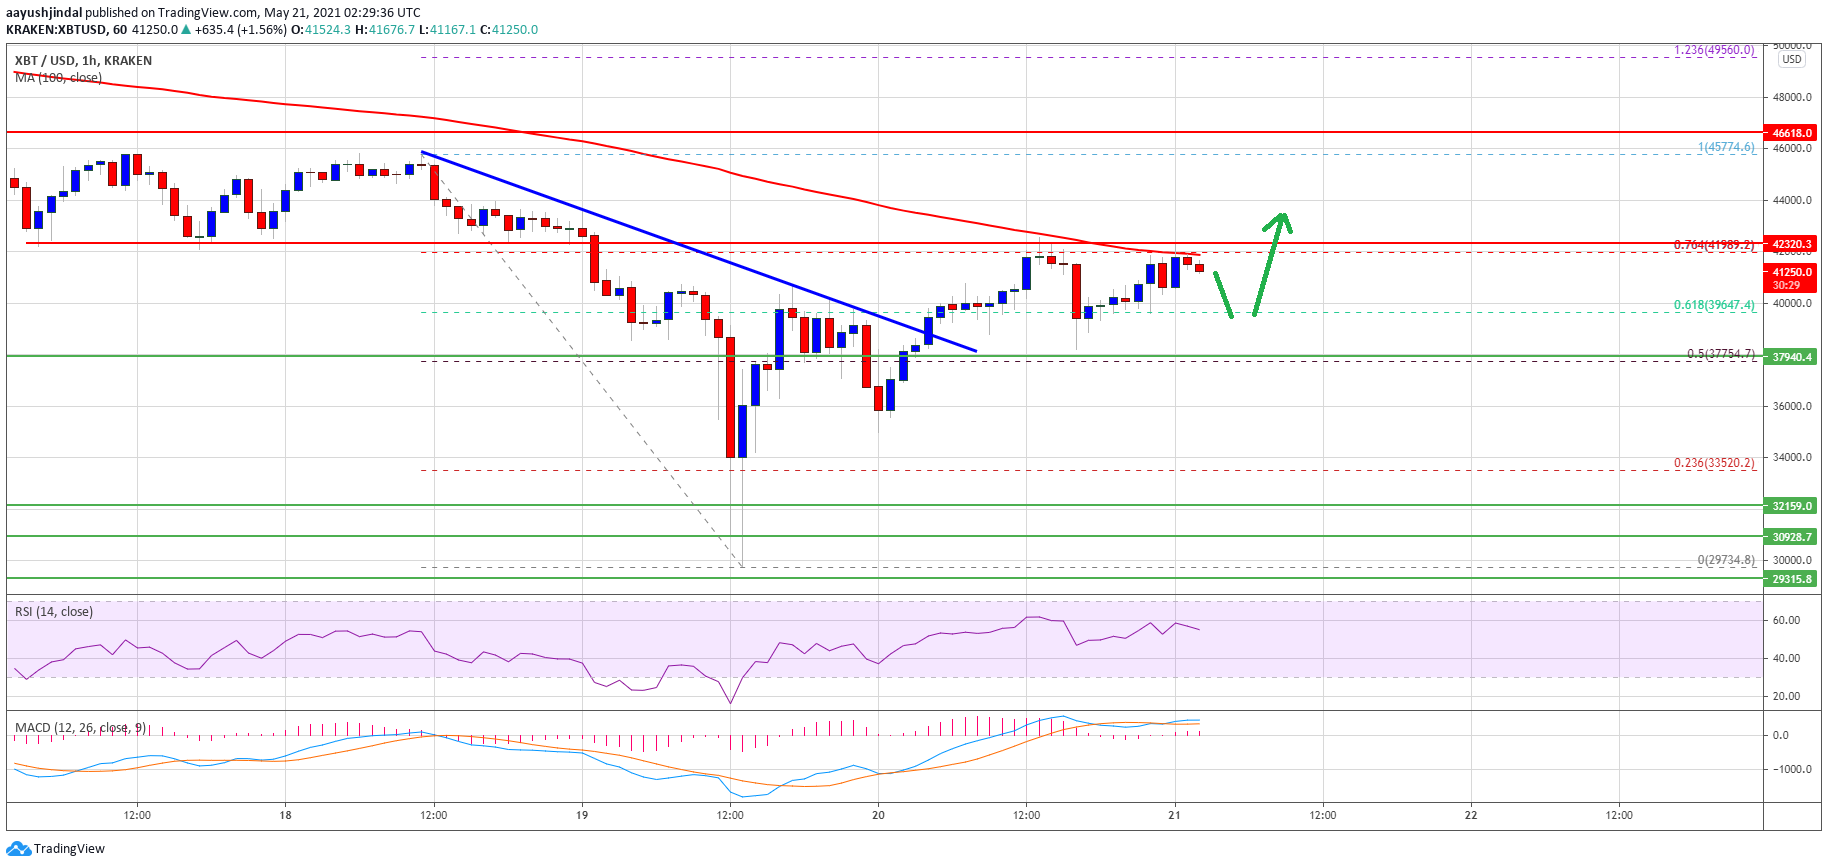 Bitcoin TA: Here’s Why BTC Could Rally If It Clears This Key Hurdle